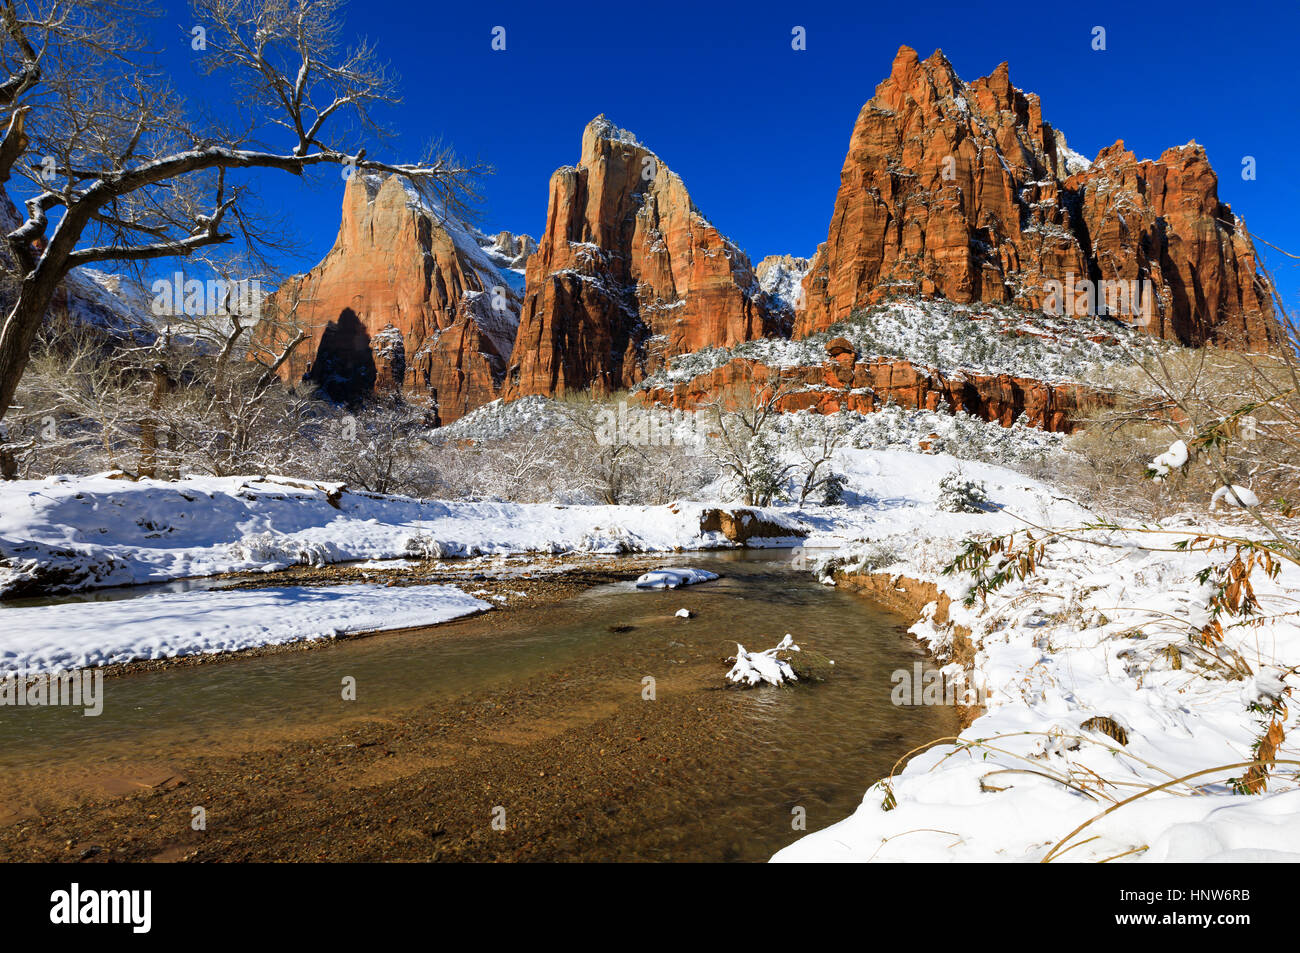 This is a view of the Court of the Patriarchs with a fresh covering of snow and the North Fork of the Virgin River in Zion National Park Utah, USA. Stock Photo